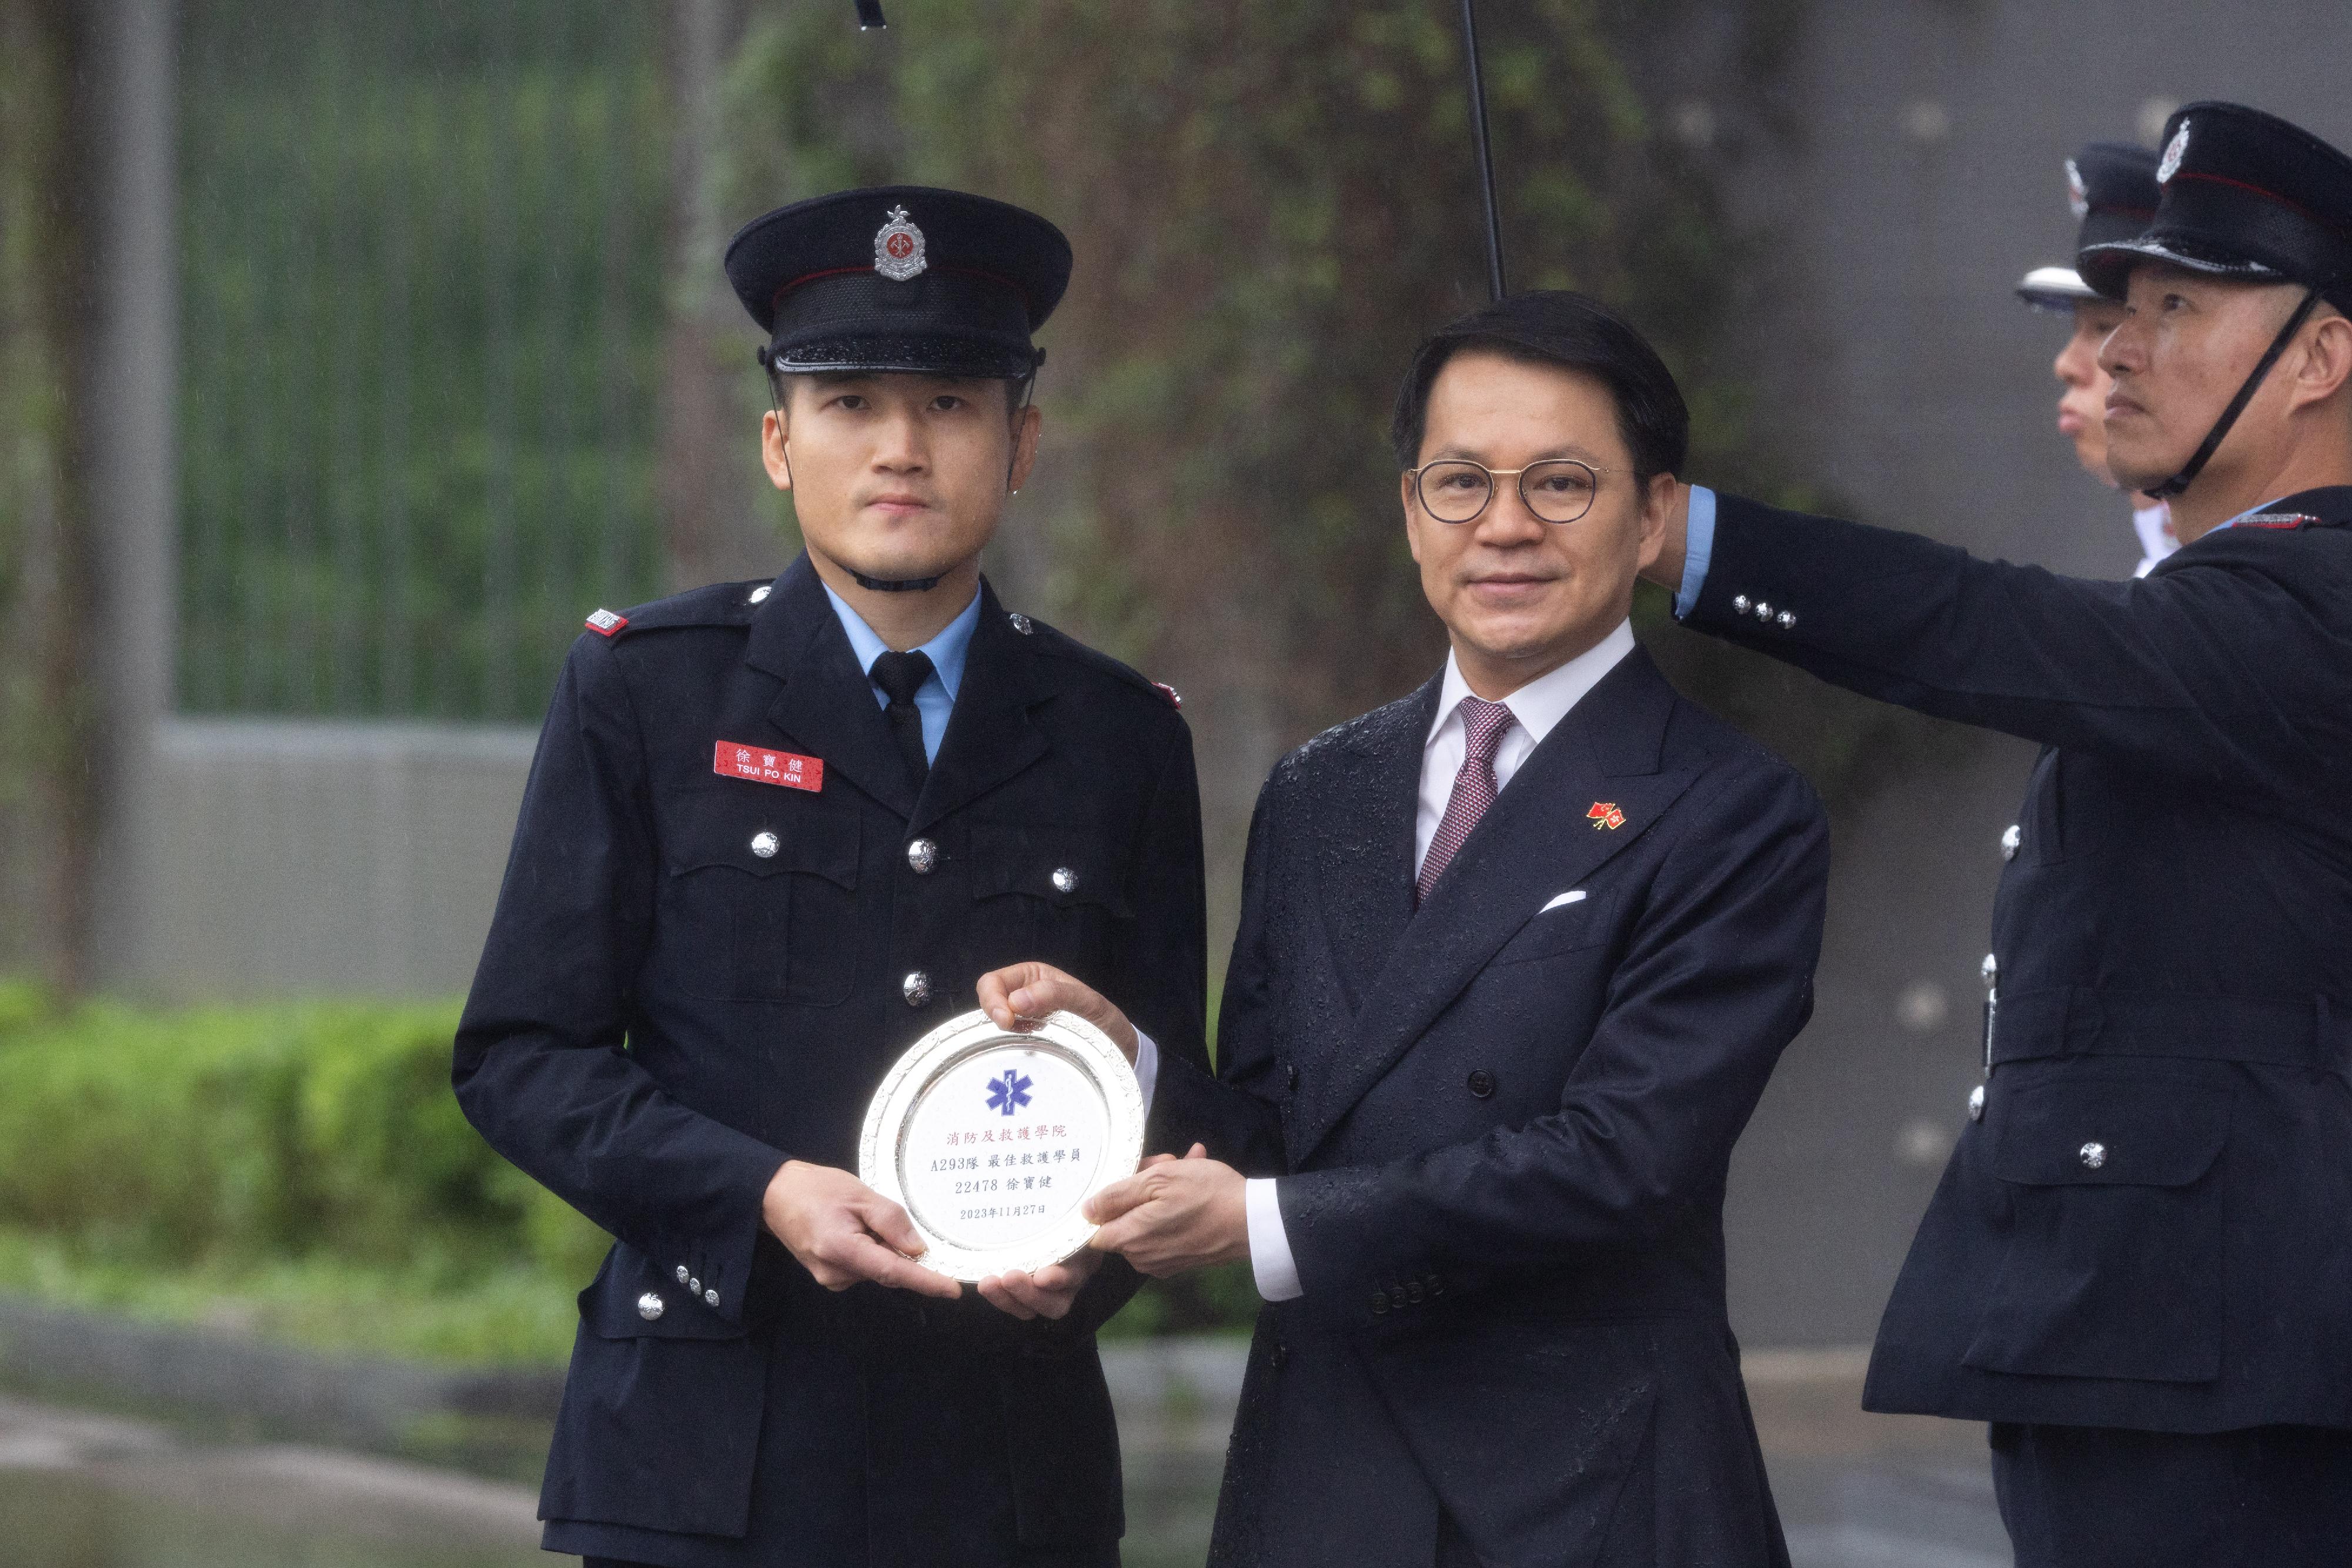 The Chairman of the Legislative Council Panel on Security, Mr Chan Hak-kan, reviewed the Fire Services passing-out parade at the Fire and Ambulance Services Academy today (May 24). Photo shows Mr Chan (second left) presenting the Best Recruit Ambulanceman award to a graduate.